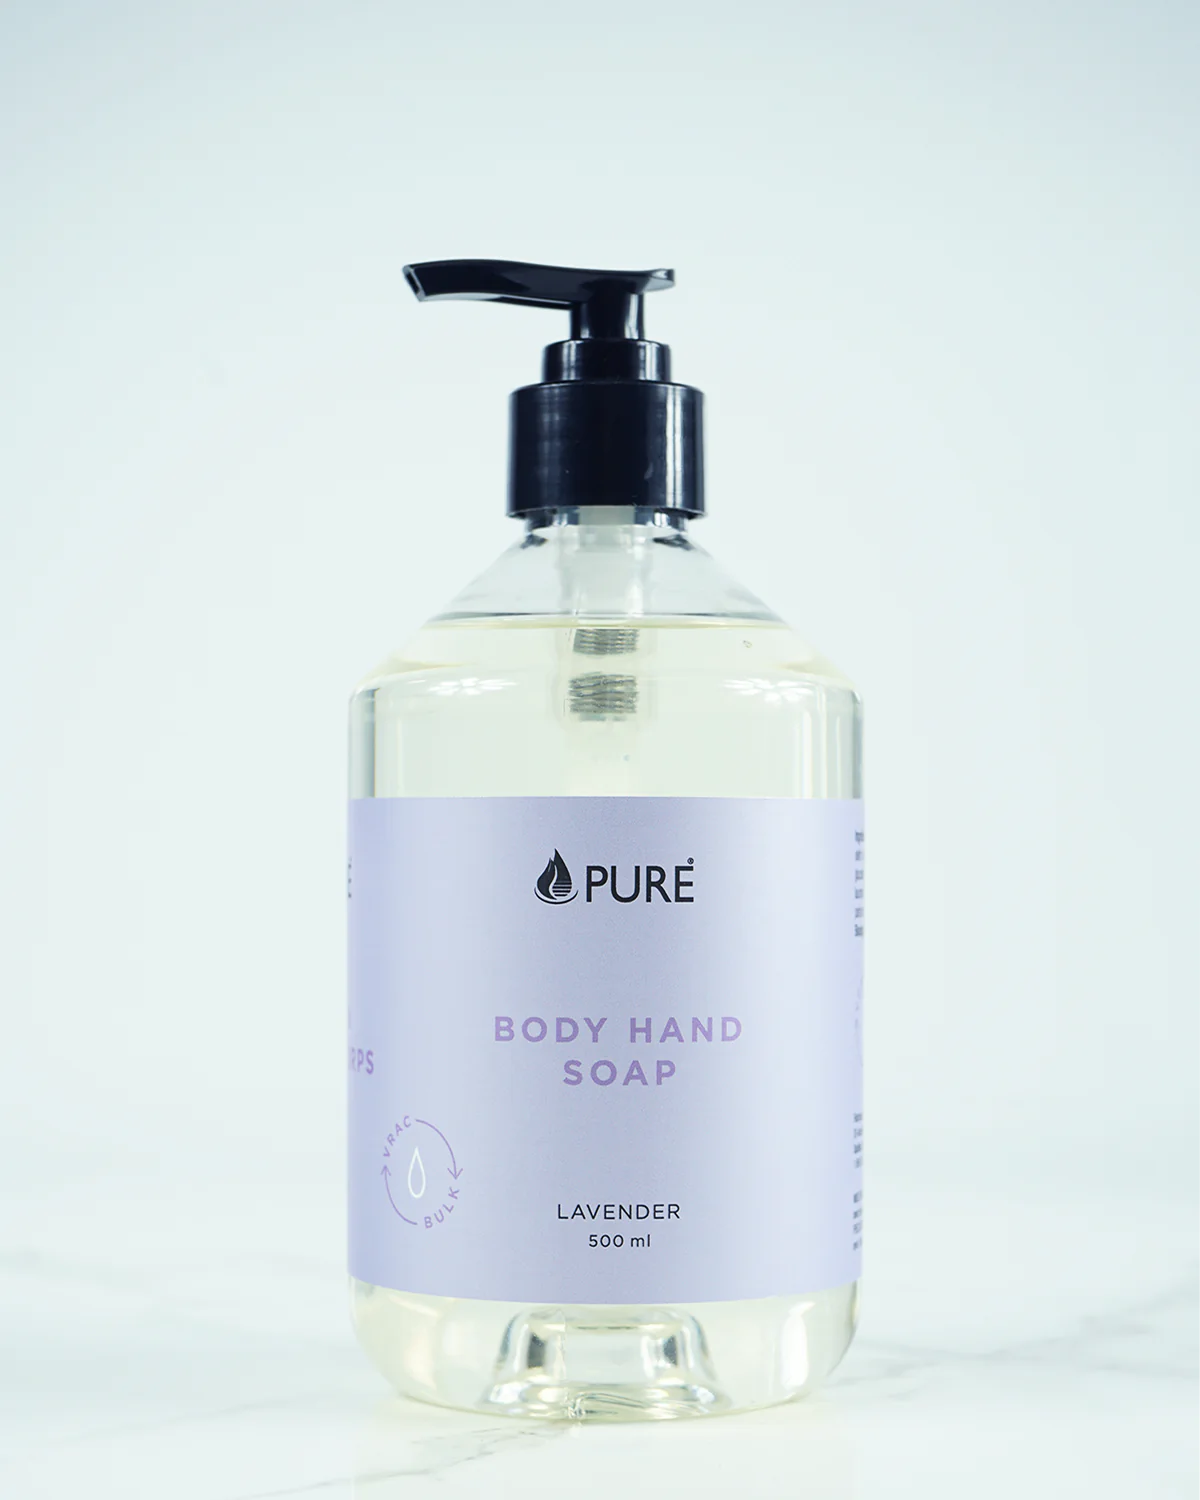 Our moisturizing cleanser just makes your life easier. It goes everywhere (kitchen/bathroom sink, shower, gym bag, name it!). It also pleases everyone. With its natural ingredients and delicate formula, it fits any type of skin, even the most sensitive. There is even a hypoallergenic version, perfume less.